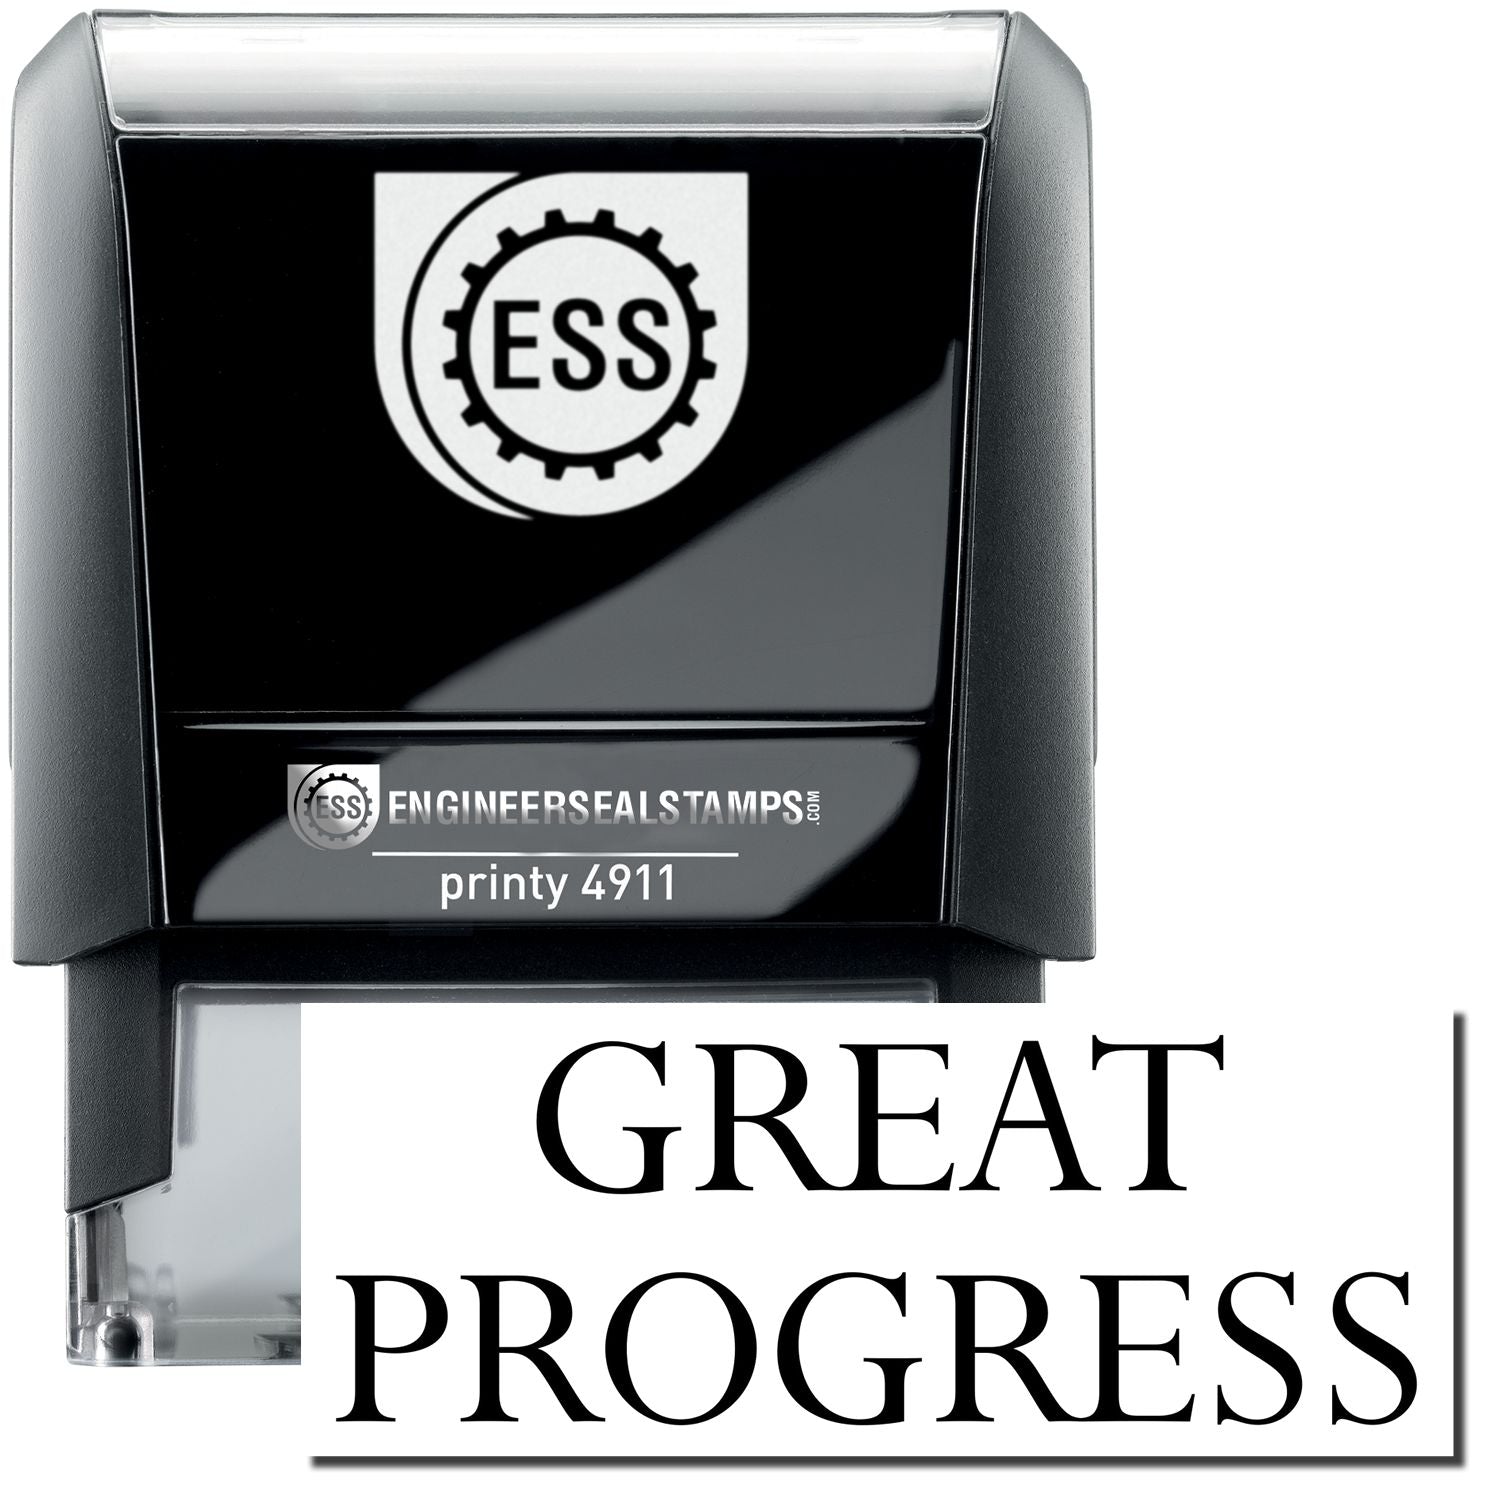 A self-inking stamp with a stamped image showing how the text "GREAT PROGRESS" is displayed after stamping.